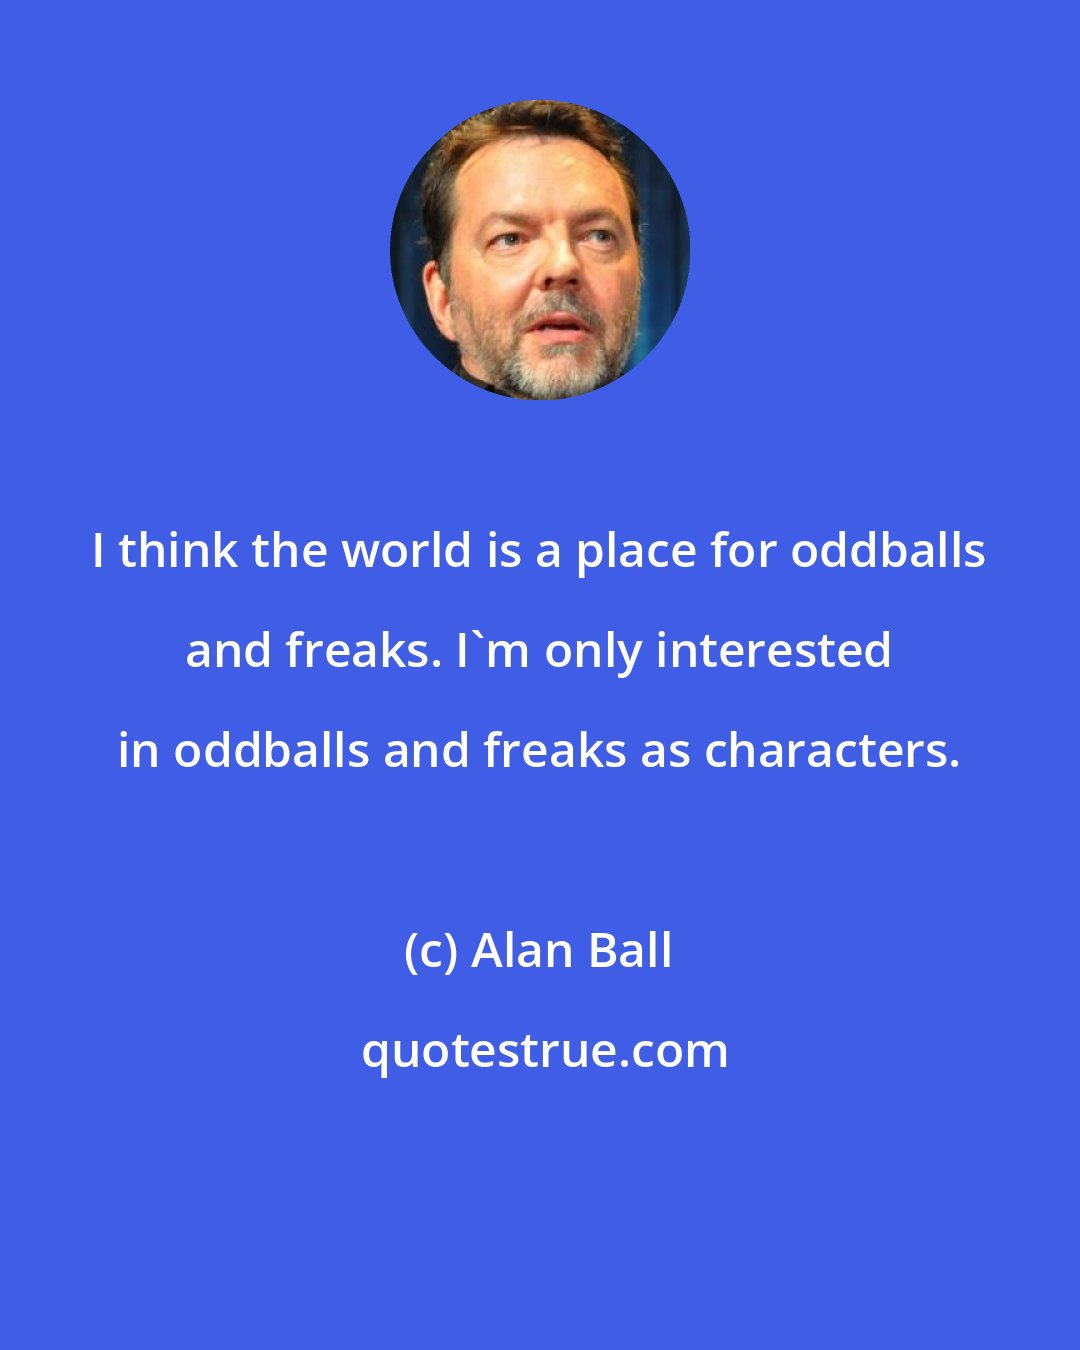 Alan Ball: I think the world is a place for oddballs and freaks. I'm only interested in oddballs and freaks as characters.